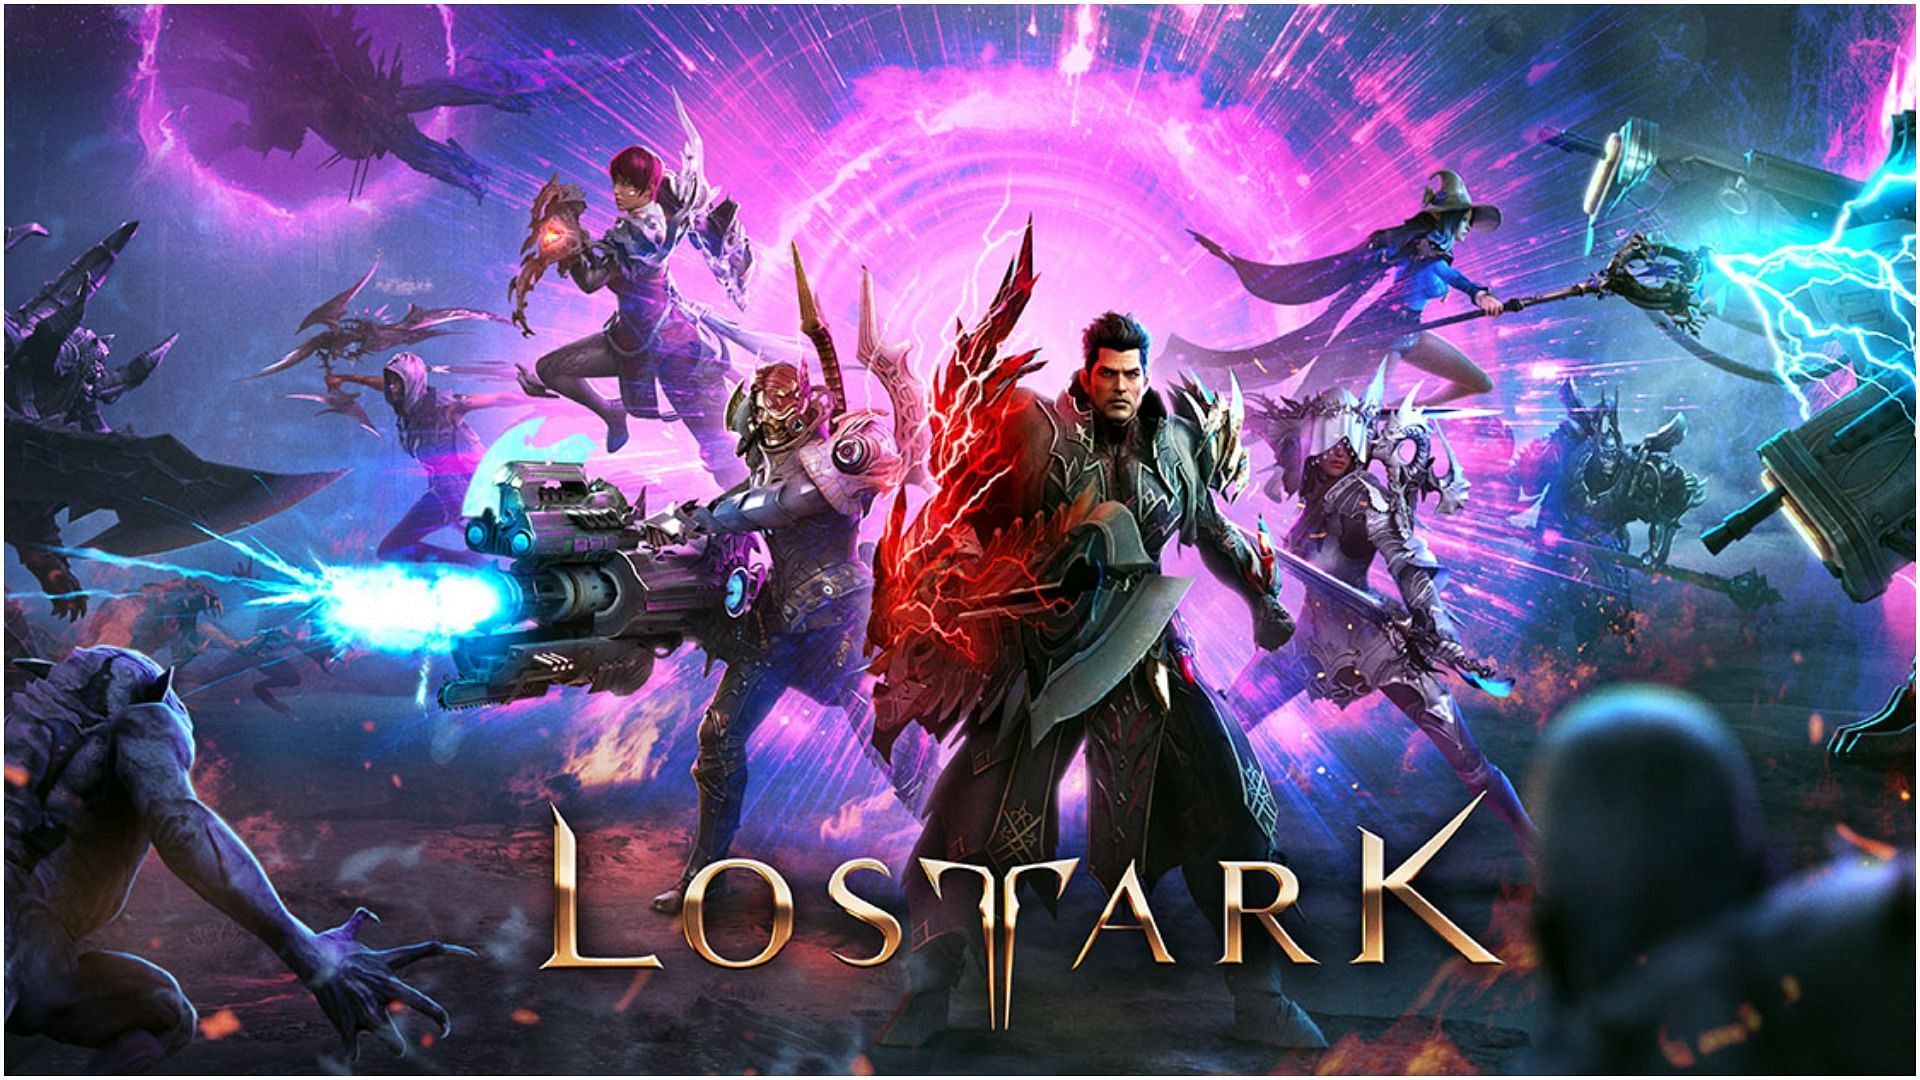 Lost Ark will be releasing a mega patch that adds a new class, continent, and more (Image via Amazon Games)